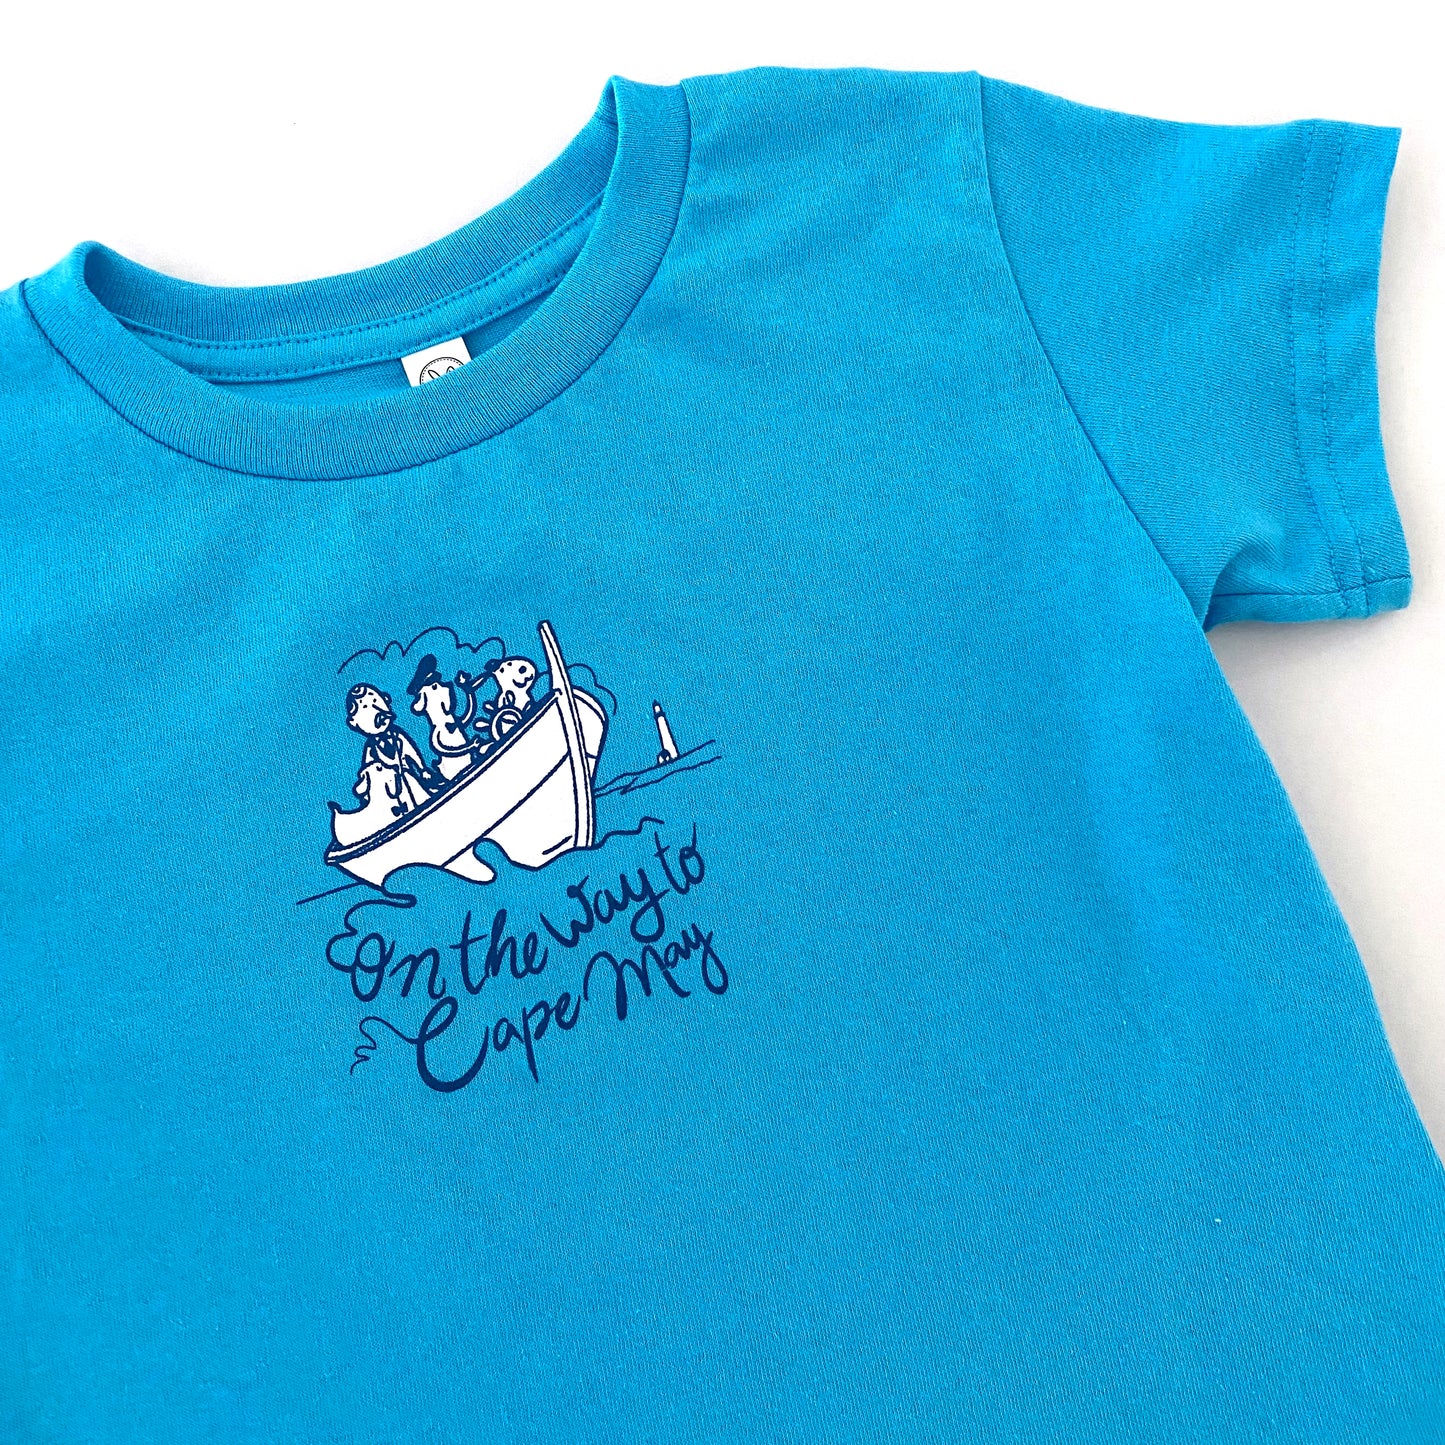 By Boat Toddler T-Shirt in Aqua